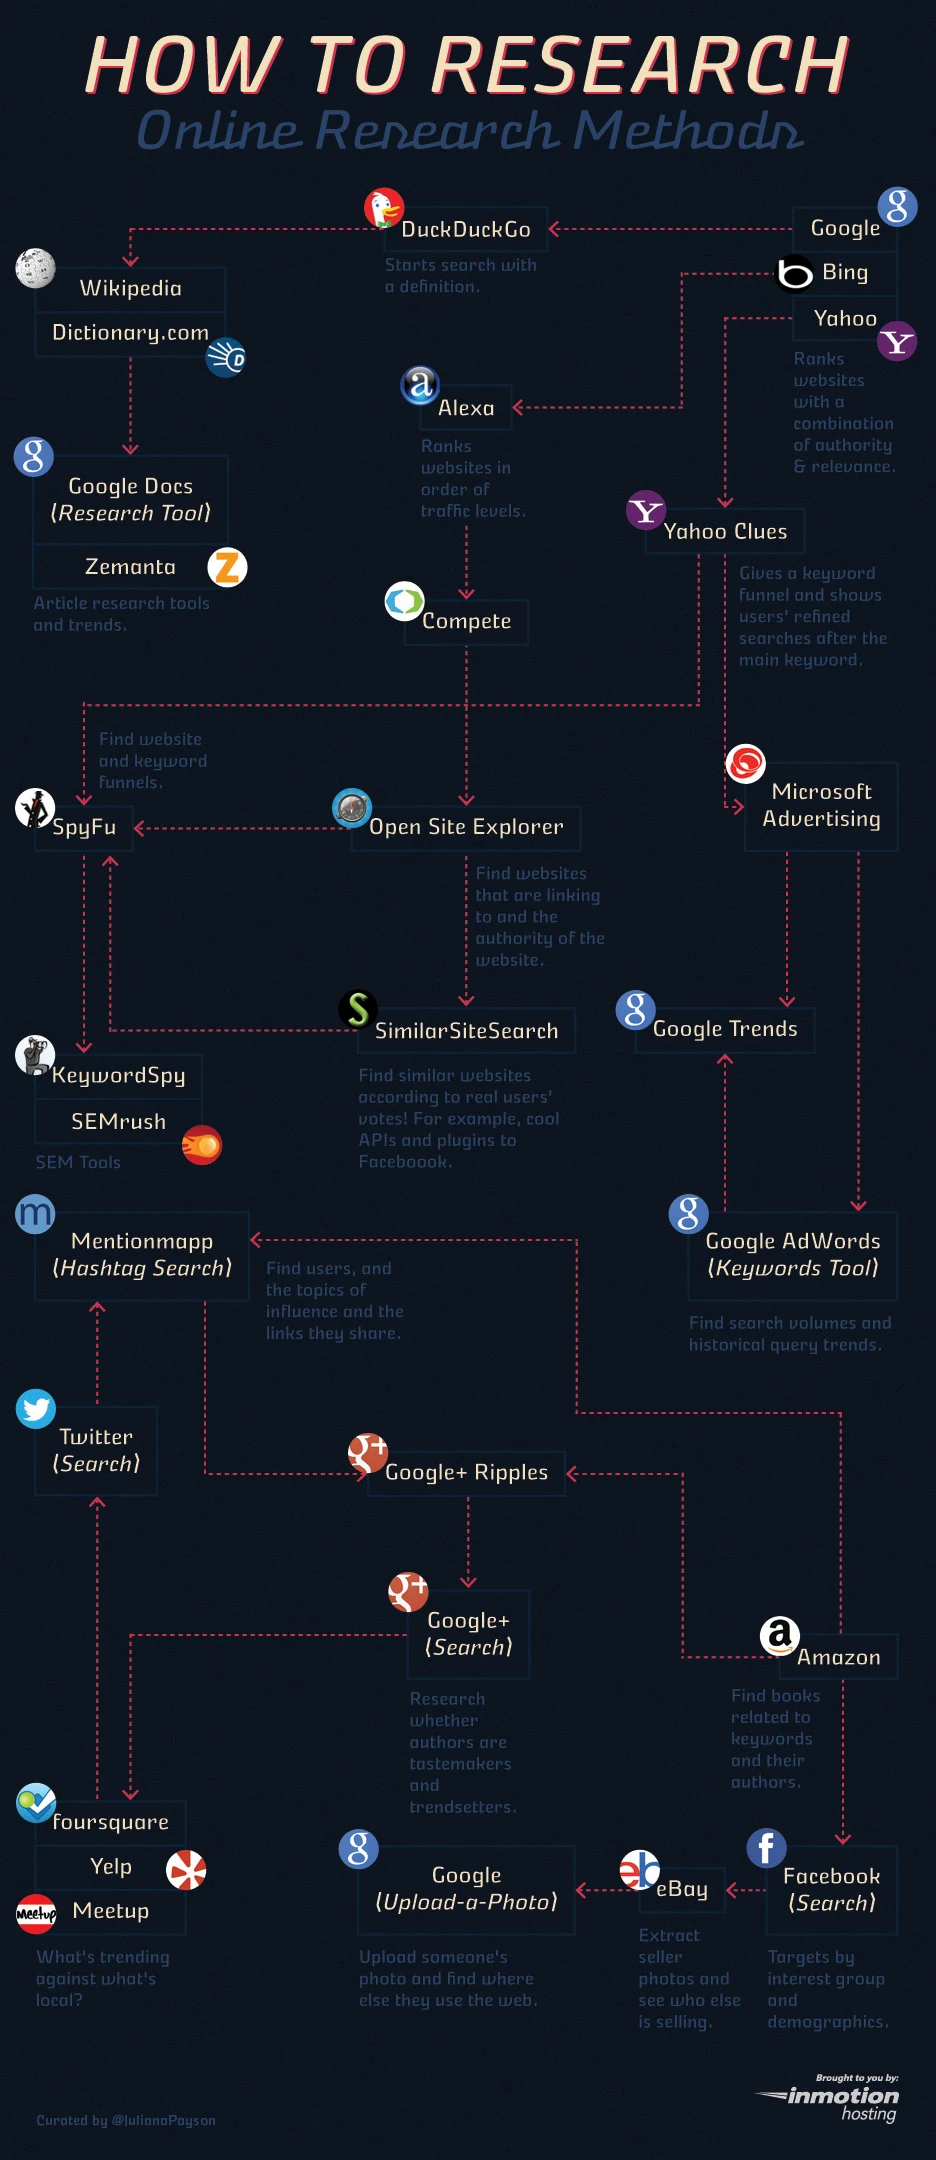 How to do Research On the web and social media - #Infographic learn the methods of researching on the internet